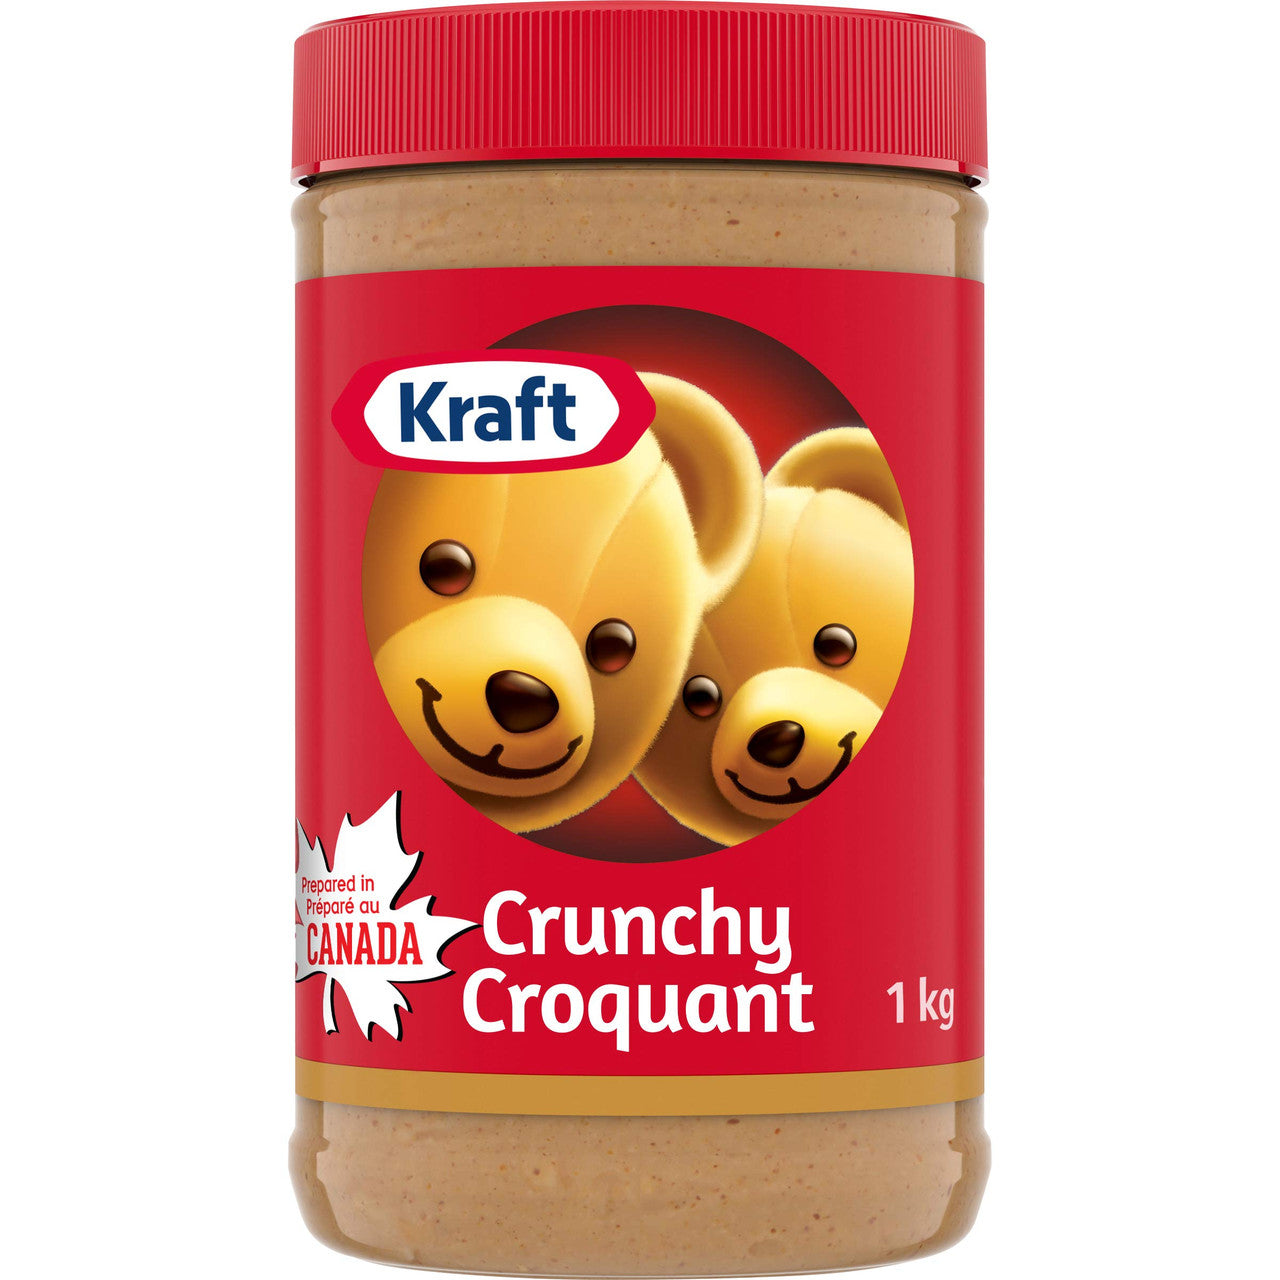 KRAFT Crunchy Peanut Butter  1kg/ 2.2 lbs.{Imported from Canada}